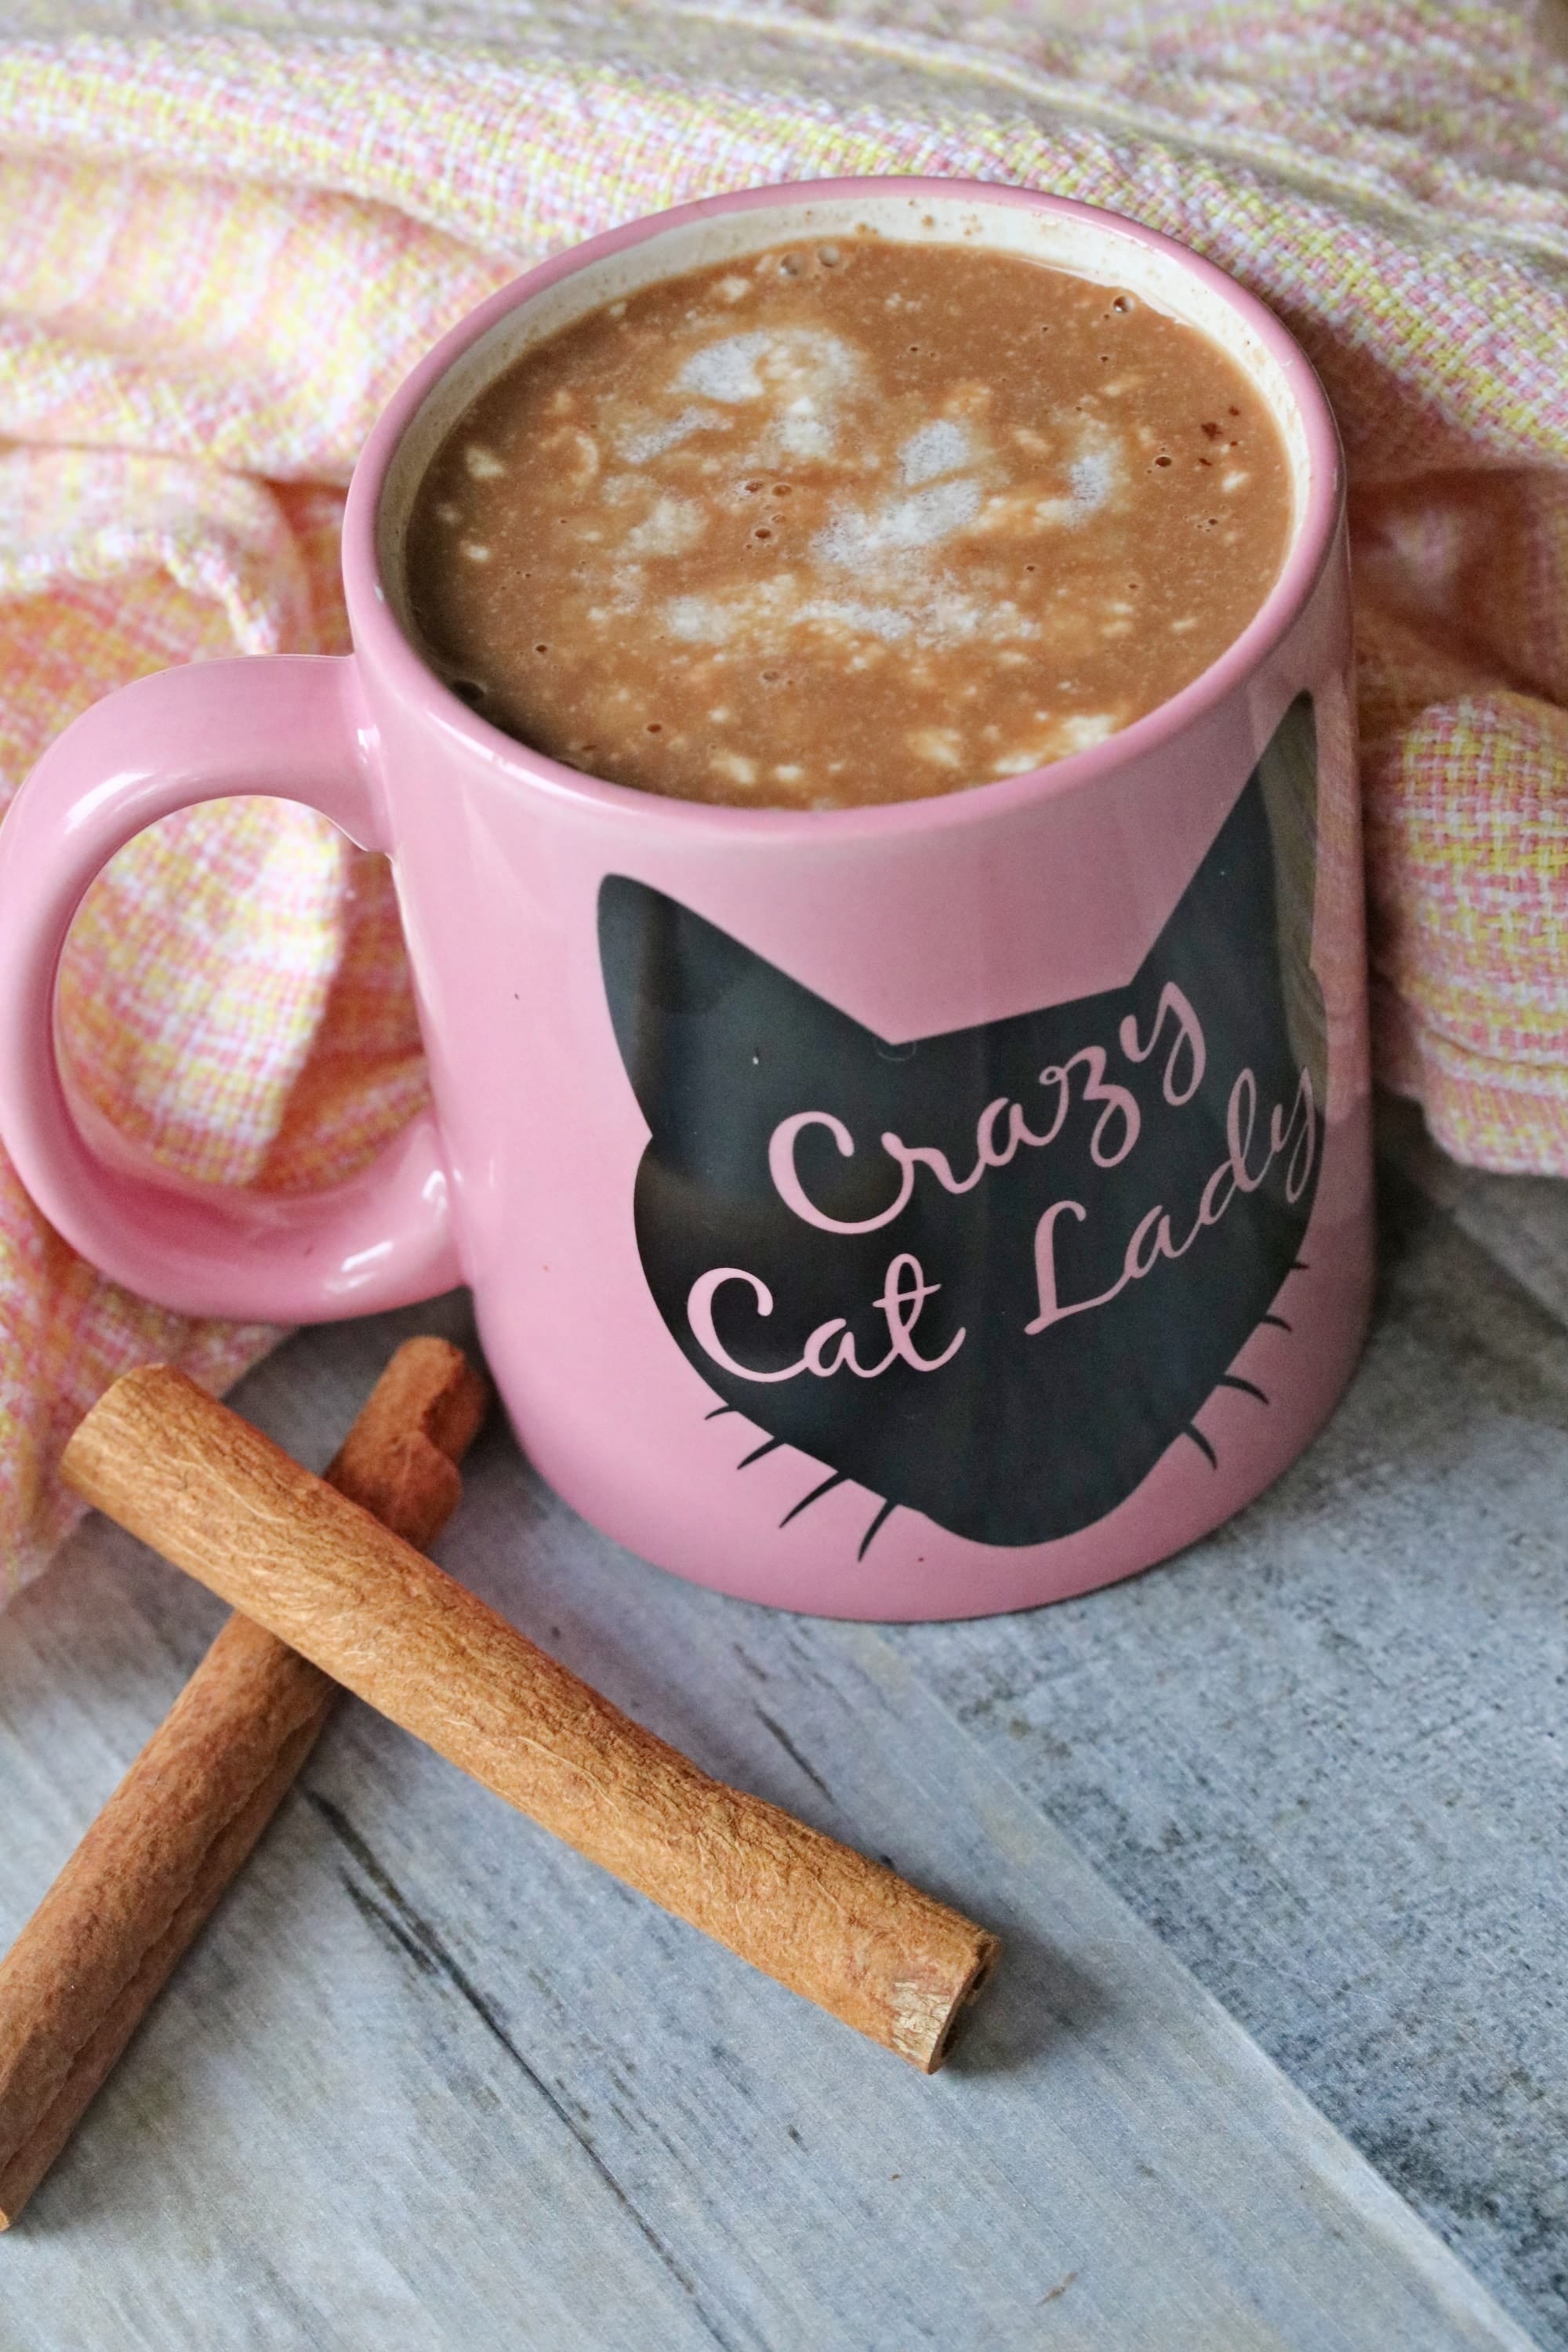 Homemade hot chocolate in pink crazy cat lady mug with cinnamon sticks beside it